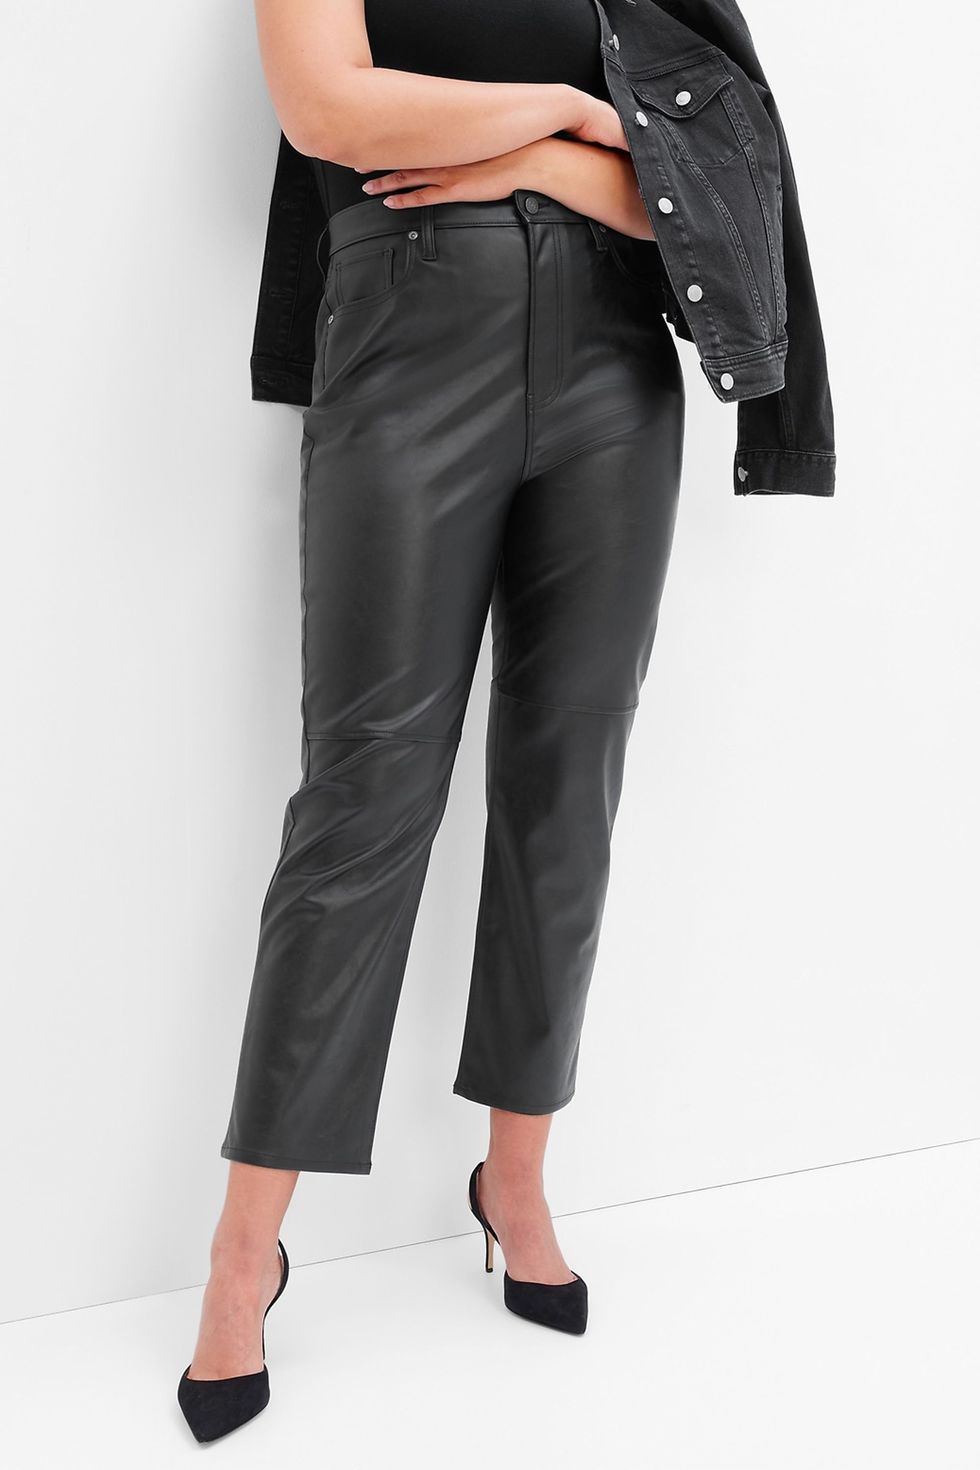 Sky High-Rise Faux-Leather Cheeky Straight Pants 